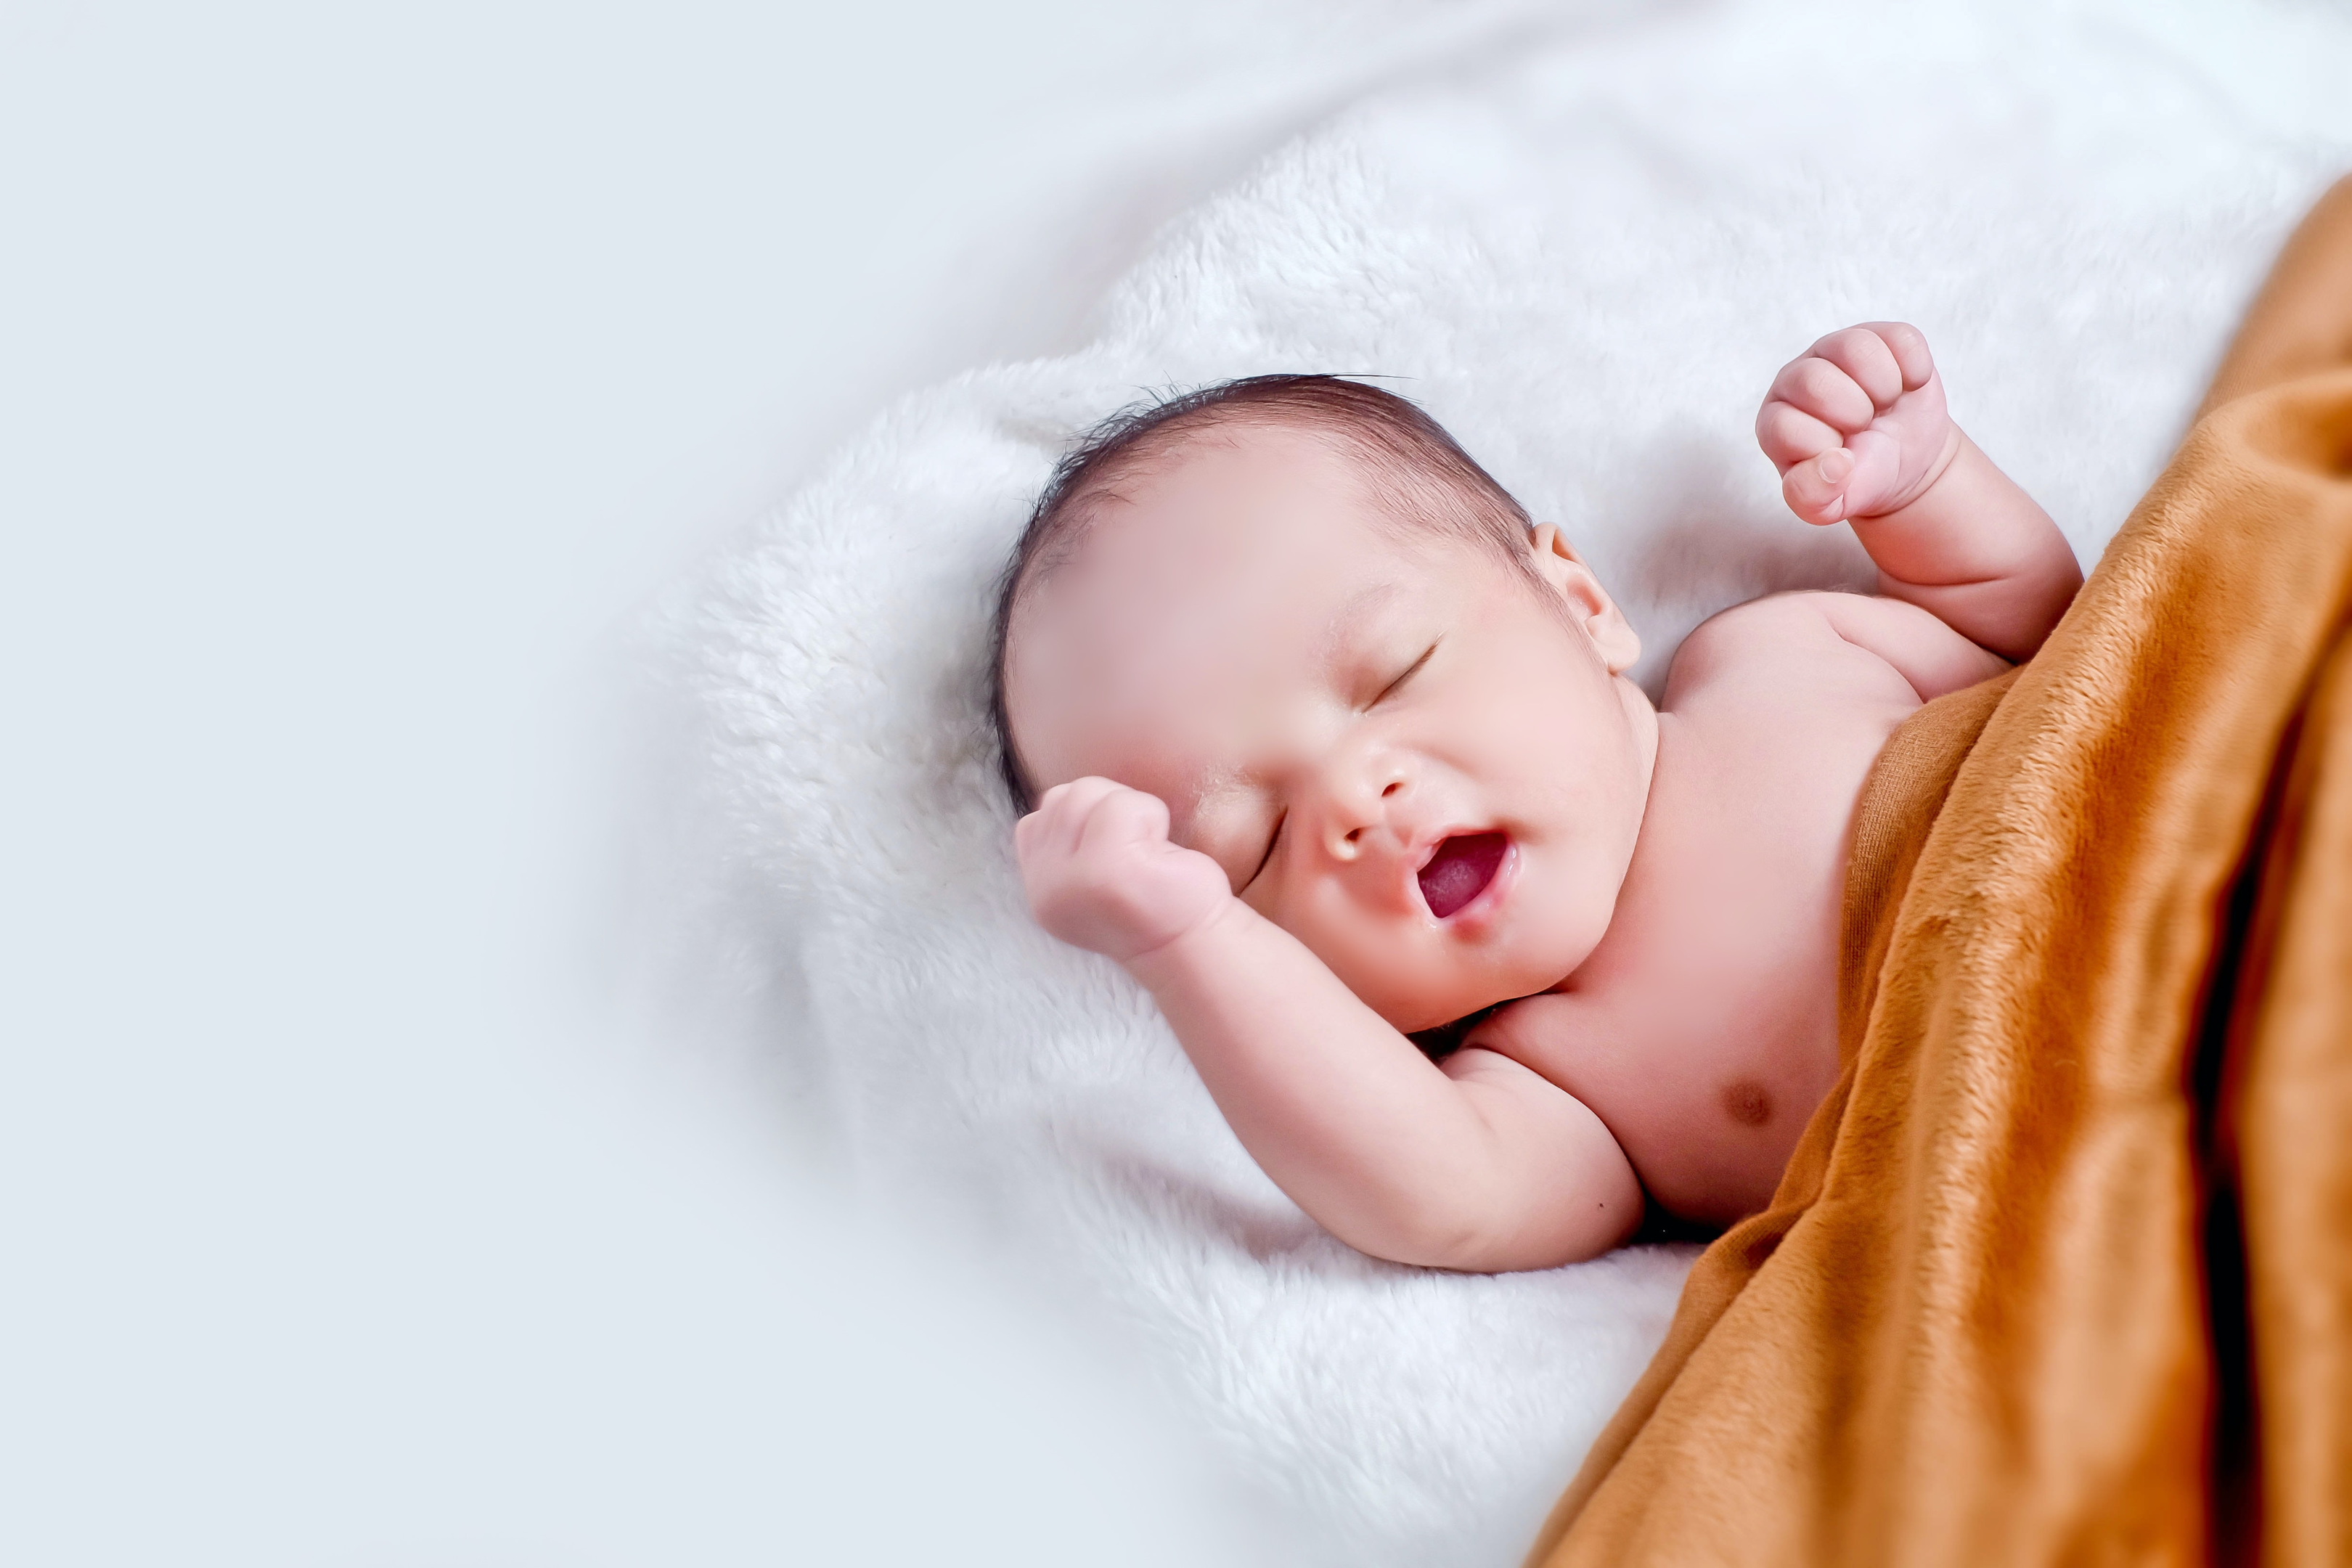 should i consider chiropractic care for my baby?